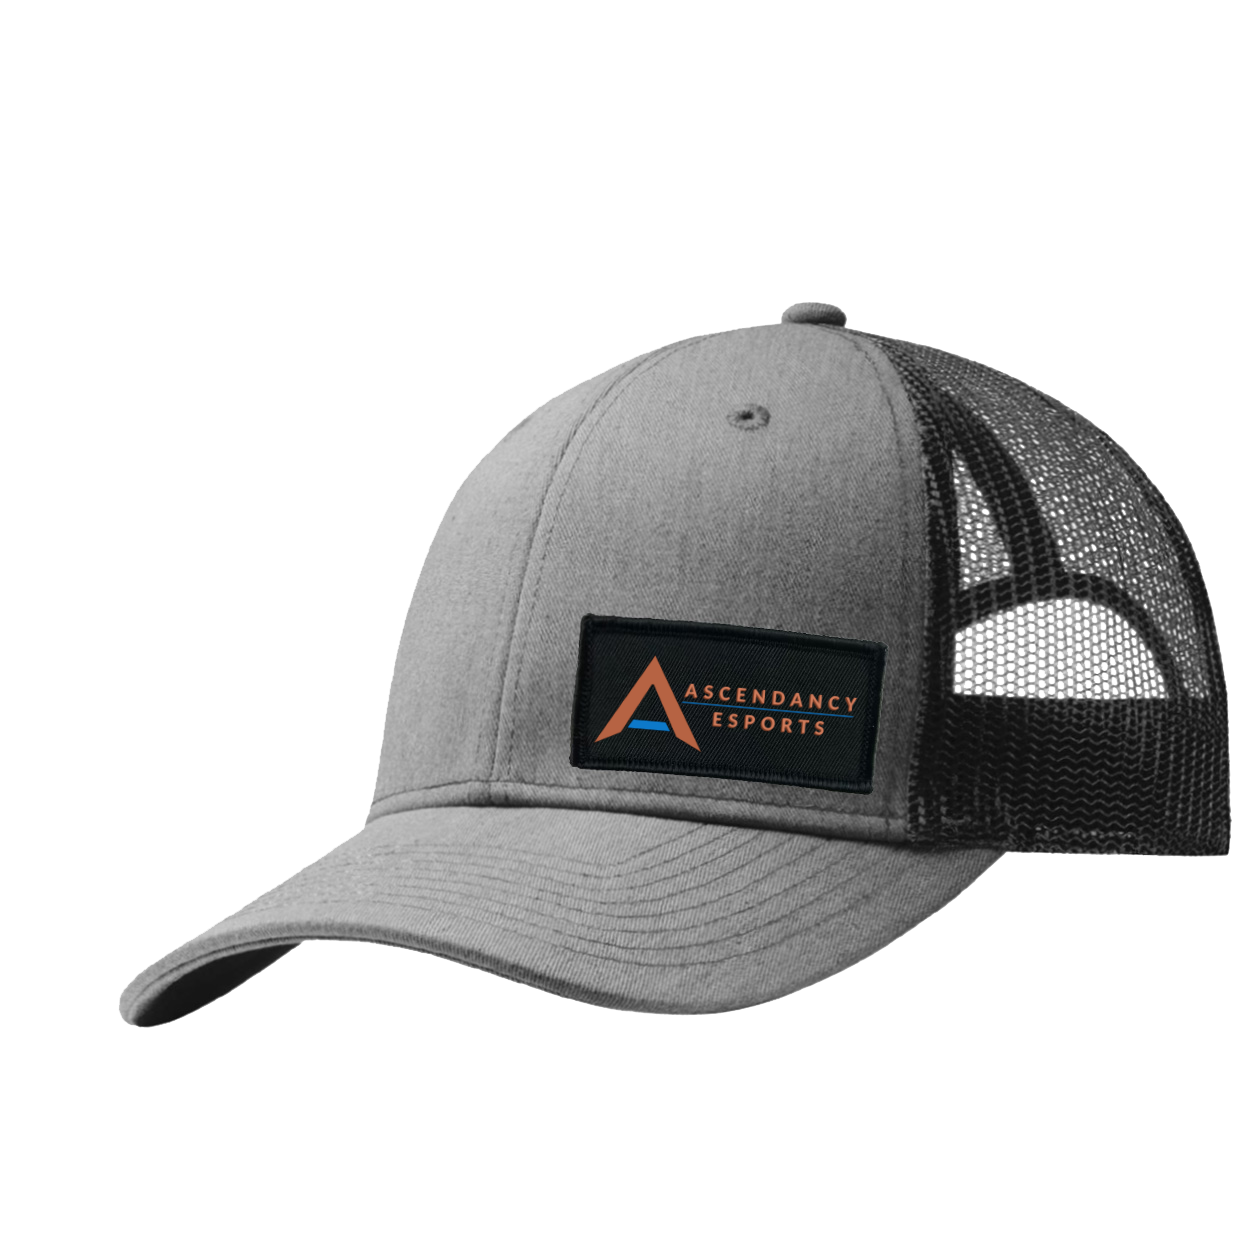 Ascendancy Esports Night Out Woven Patch Snapback Trucker Hat Heather Gray/Black